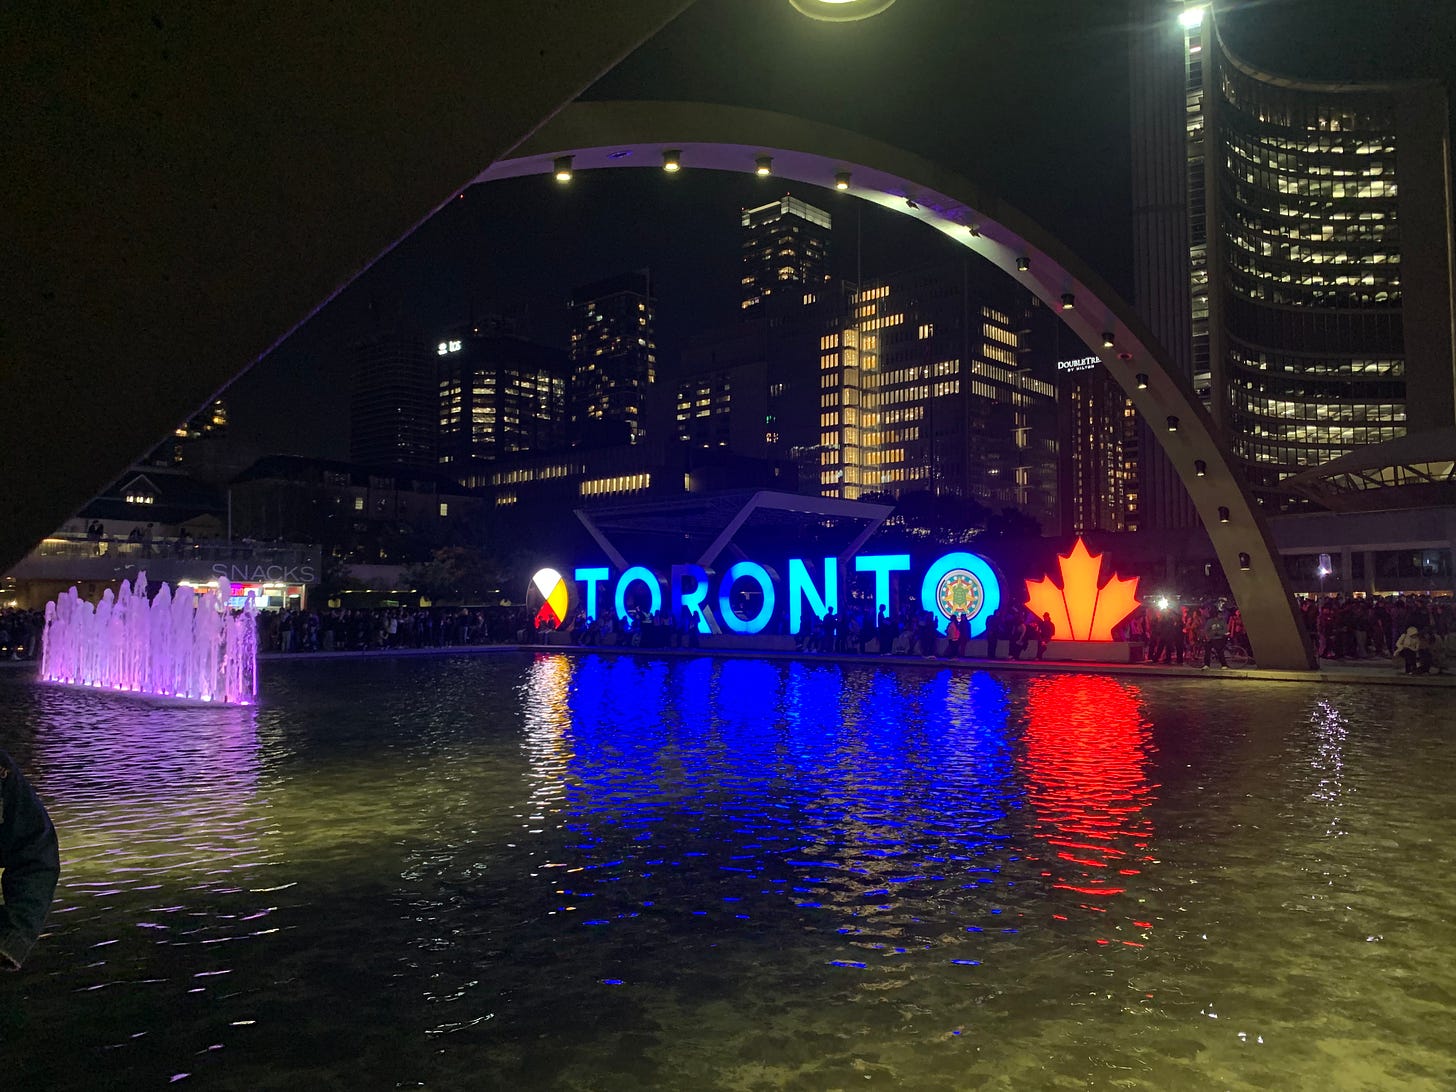 A square public fountain with the words TORONTO lit up in blue.